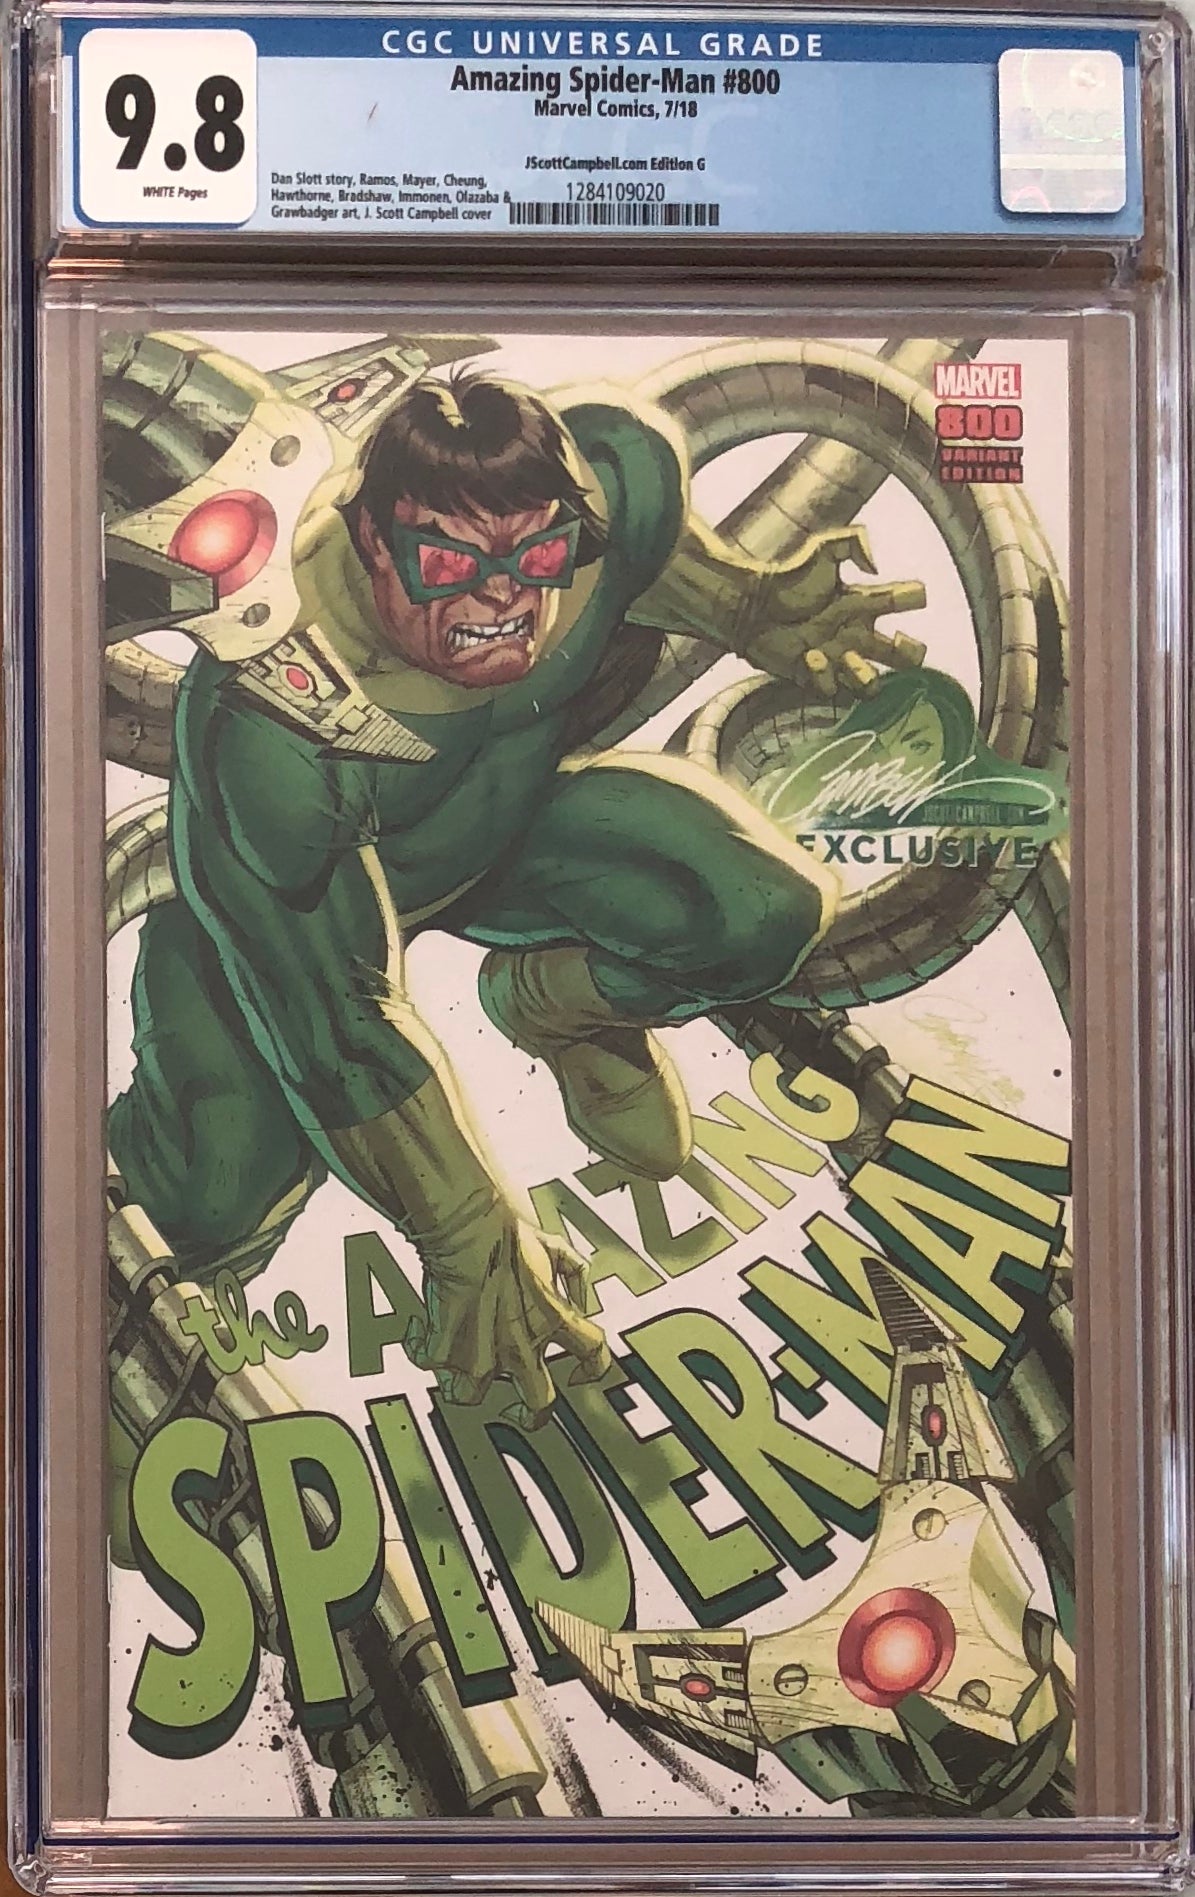 Amazing Spider-Man #800 J. Scott Campbell Edition G "Dr. Octopus" Exclusive CGC 9.8